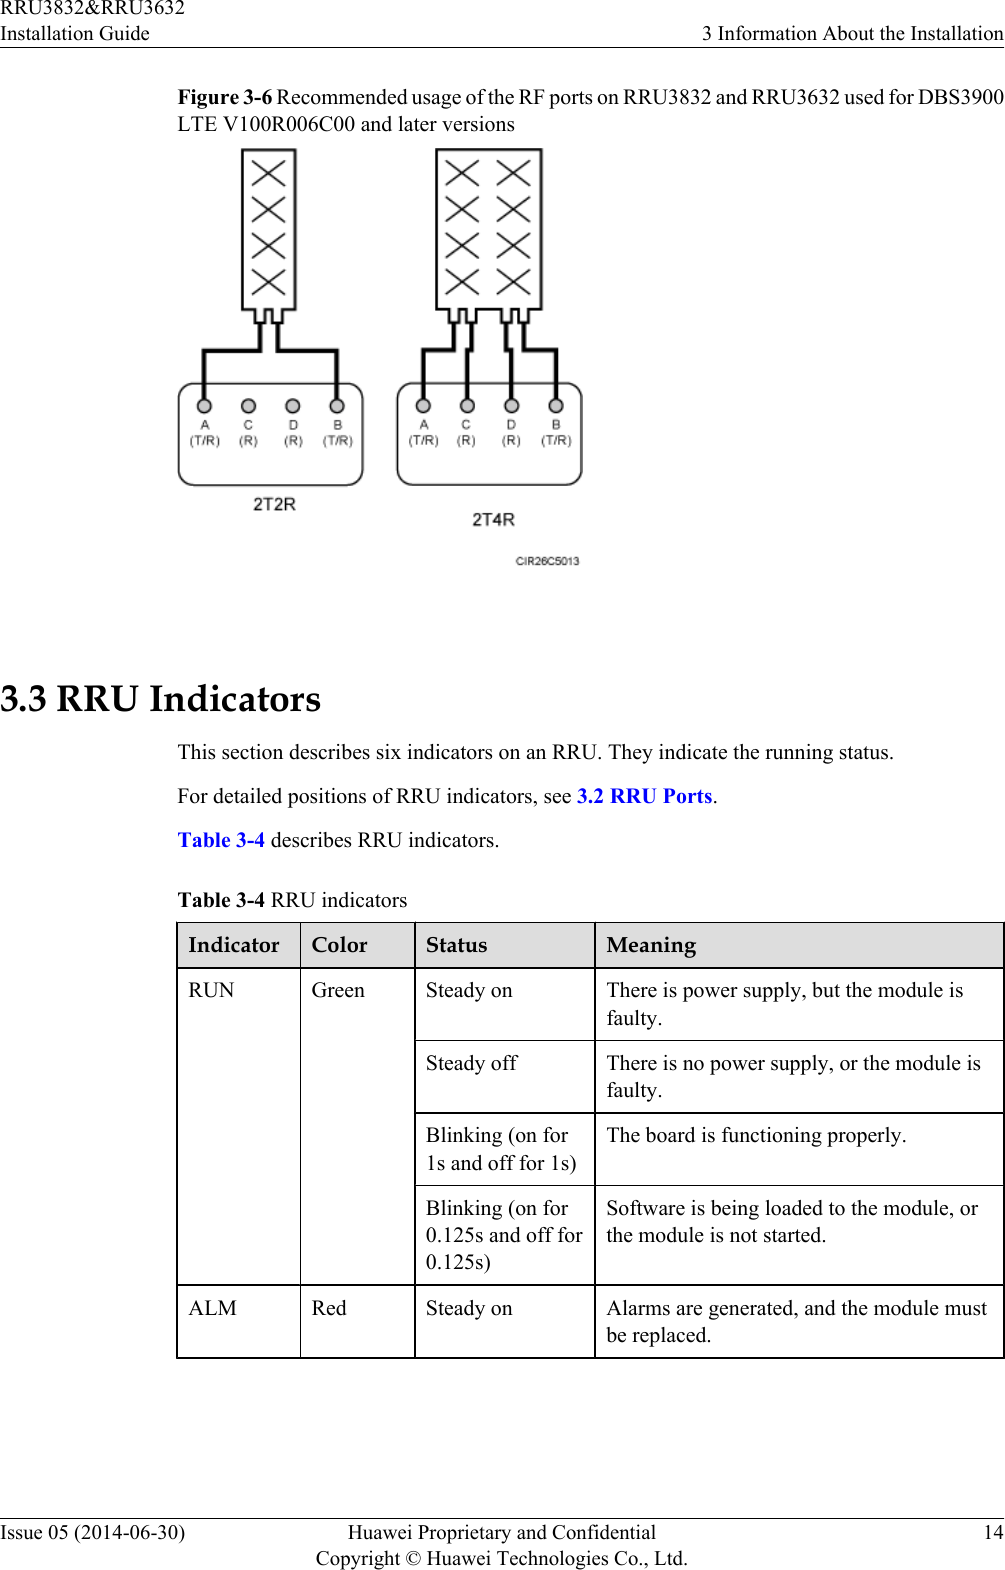 Figure 3-6 Recommended usage of the RF ports on RRU3832 and RRU3632 used for DBS3900LTE V100R006C00 and later versions 3.3 RRU IndicatorsThis section describes six indicators on an RRU. They indicate the running status.For detailed positions of RRU indicators, see 3.2 RRU Ports.Table 3-4 describes RRU indicators.Table 3-4 RRU indicatorsIndicator Color Status MeaningRUN Green Steady on There is power supply, but the module isfaulty.Steady off There is no power supply, or the module isfaulty.Blinking (on for1s and off for 1s)The board is functioning properly.Blinking (on for0.125s and off for0.125s)Software is being loaded to the module, orthe module is not started.ALM Red Steady on Alarms are generated, and the module mustbe replaced.RRU3832&amp;RRU3632Installation Guide 3 Information About the InstallationIssue 05 (2014-06-30) Huawei Proprietary and ConfidentialCopyright © Huawei Technologies Co., Ltd.14